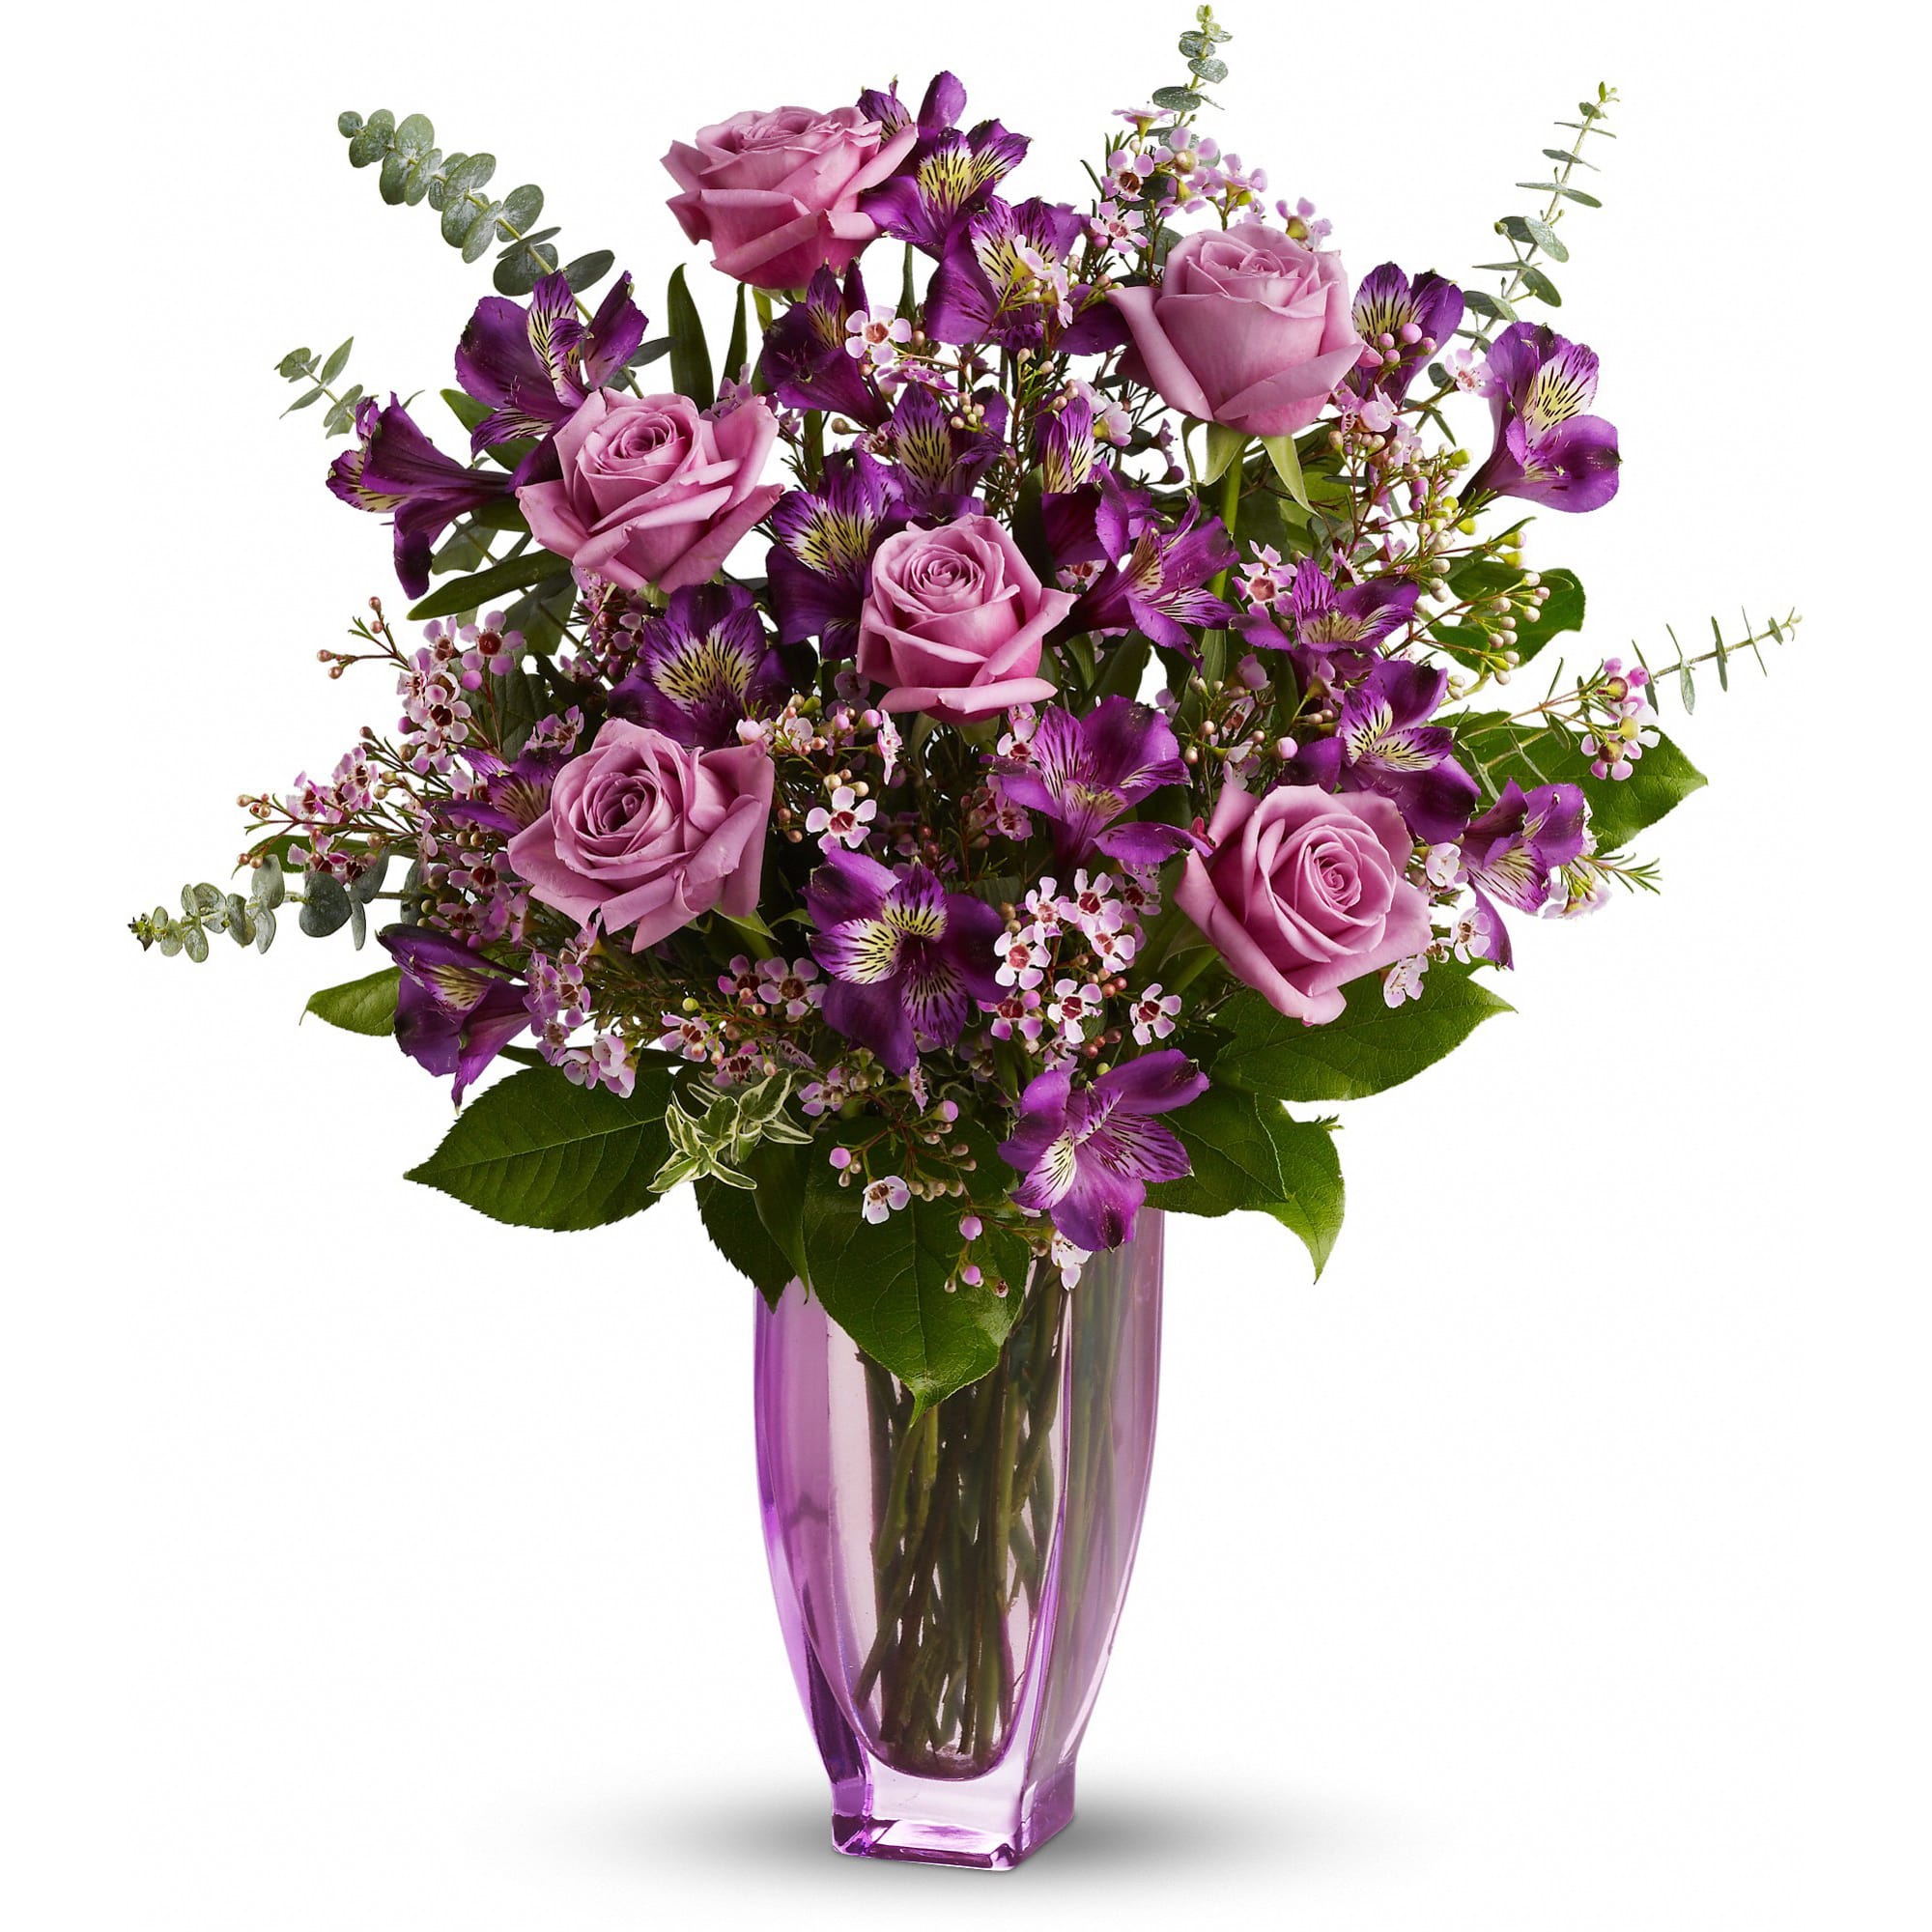 Rose Daydream - This gorgeous bouquet, aptly named for its light and delicately arranged blooms, features the most luscious lavender roses imaginable. Artistically arranged in a pale lavender vase, the mix of flowers is breathtaking. 